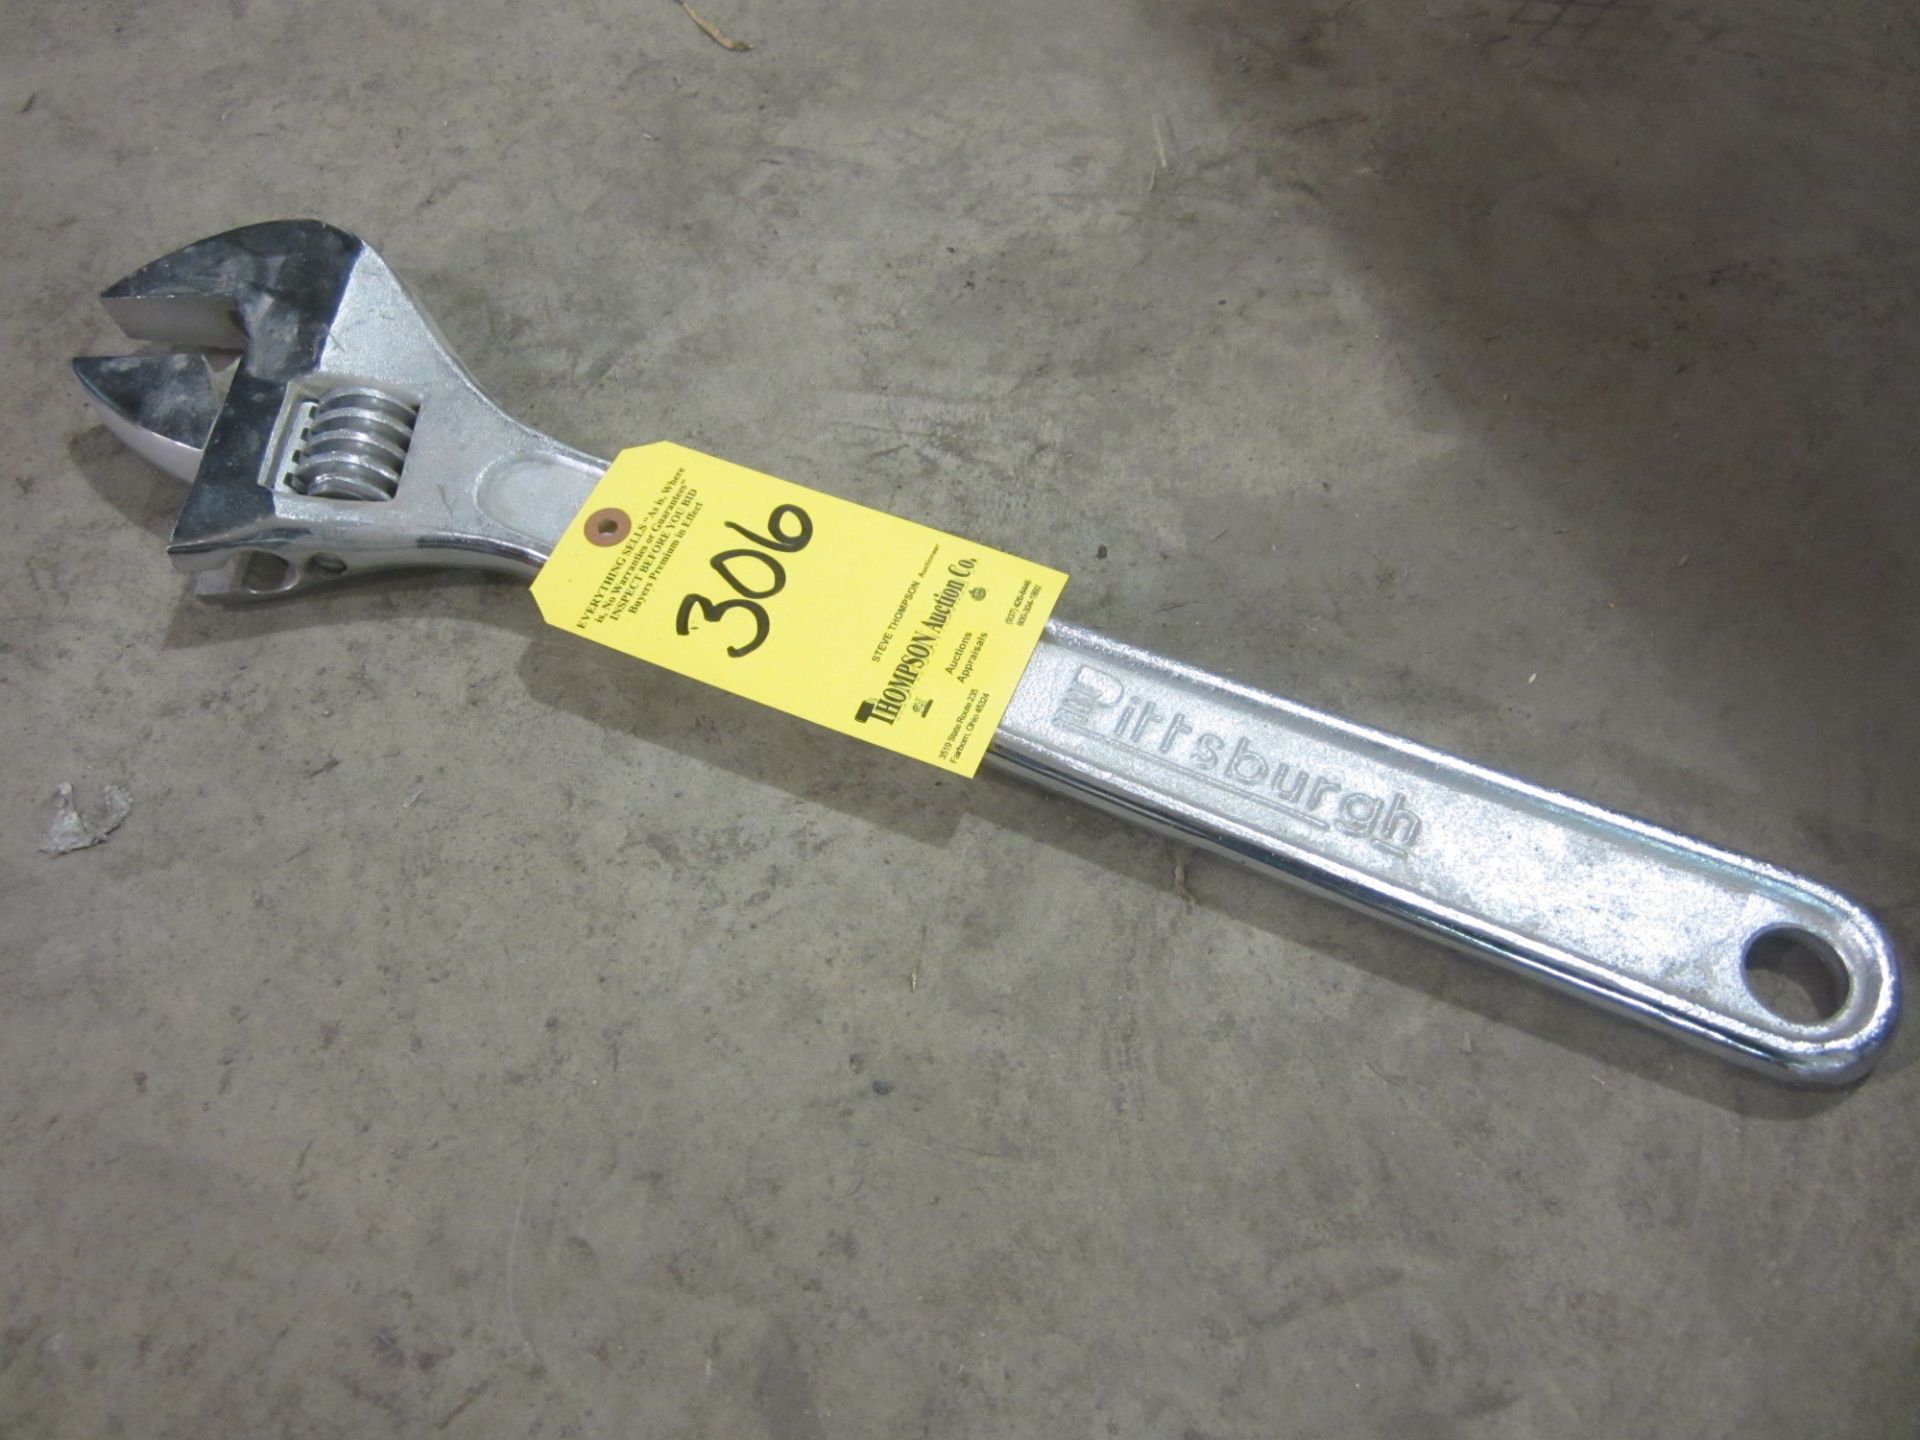 Pittsburgh 600 MM Adjustable Wrench, New